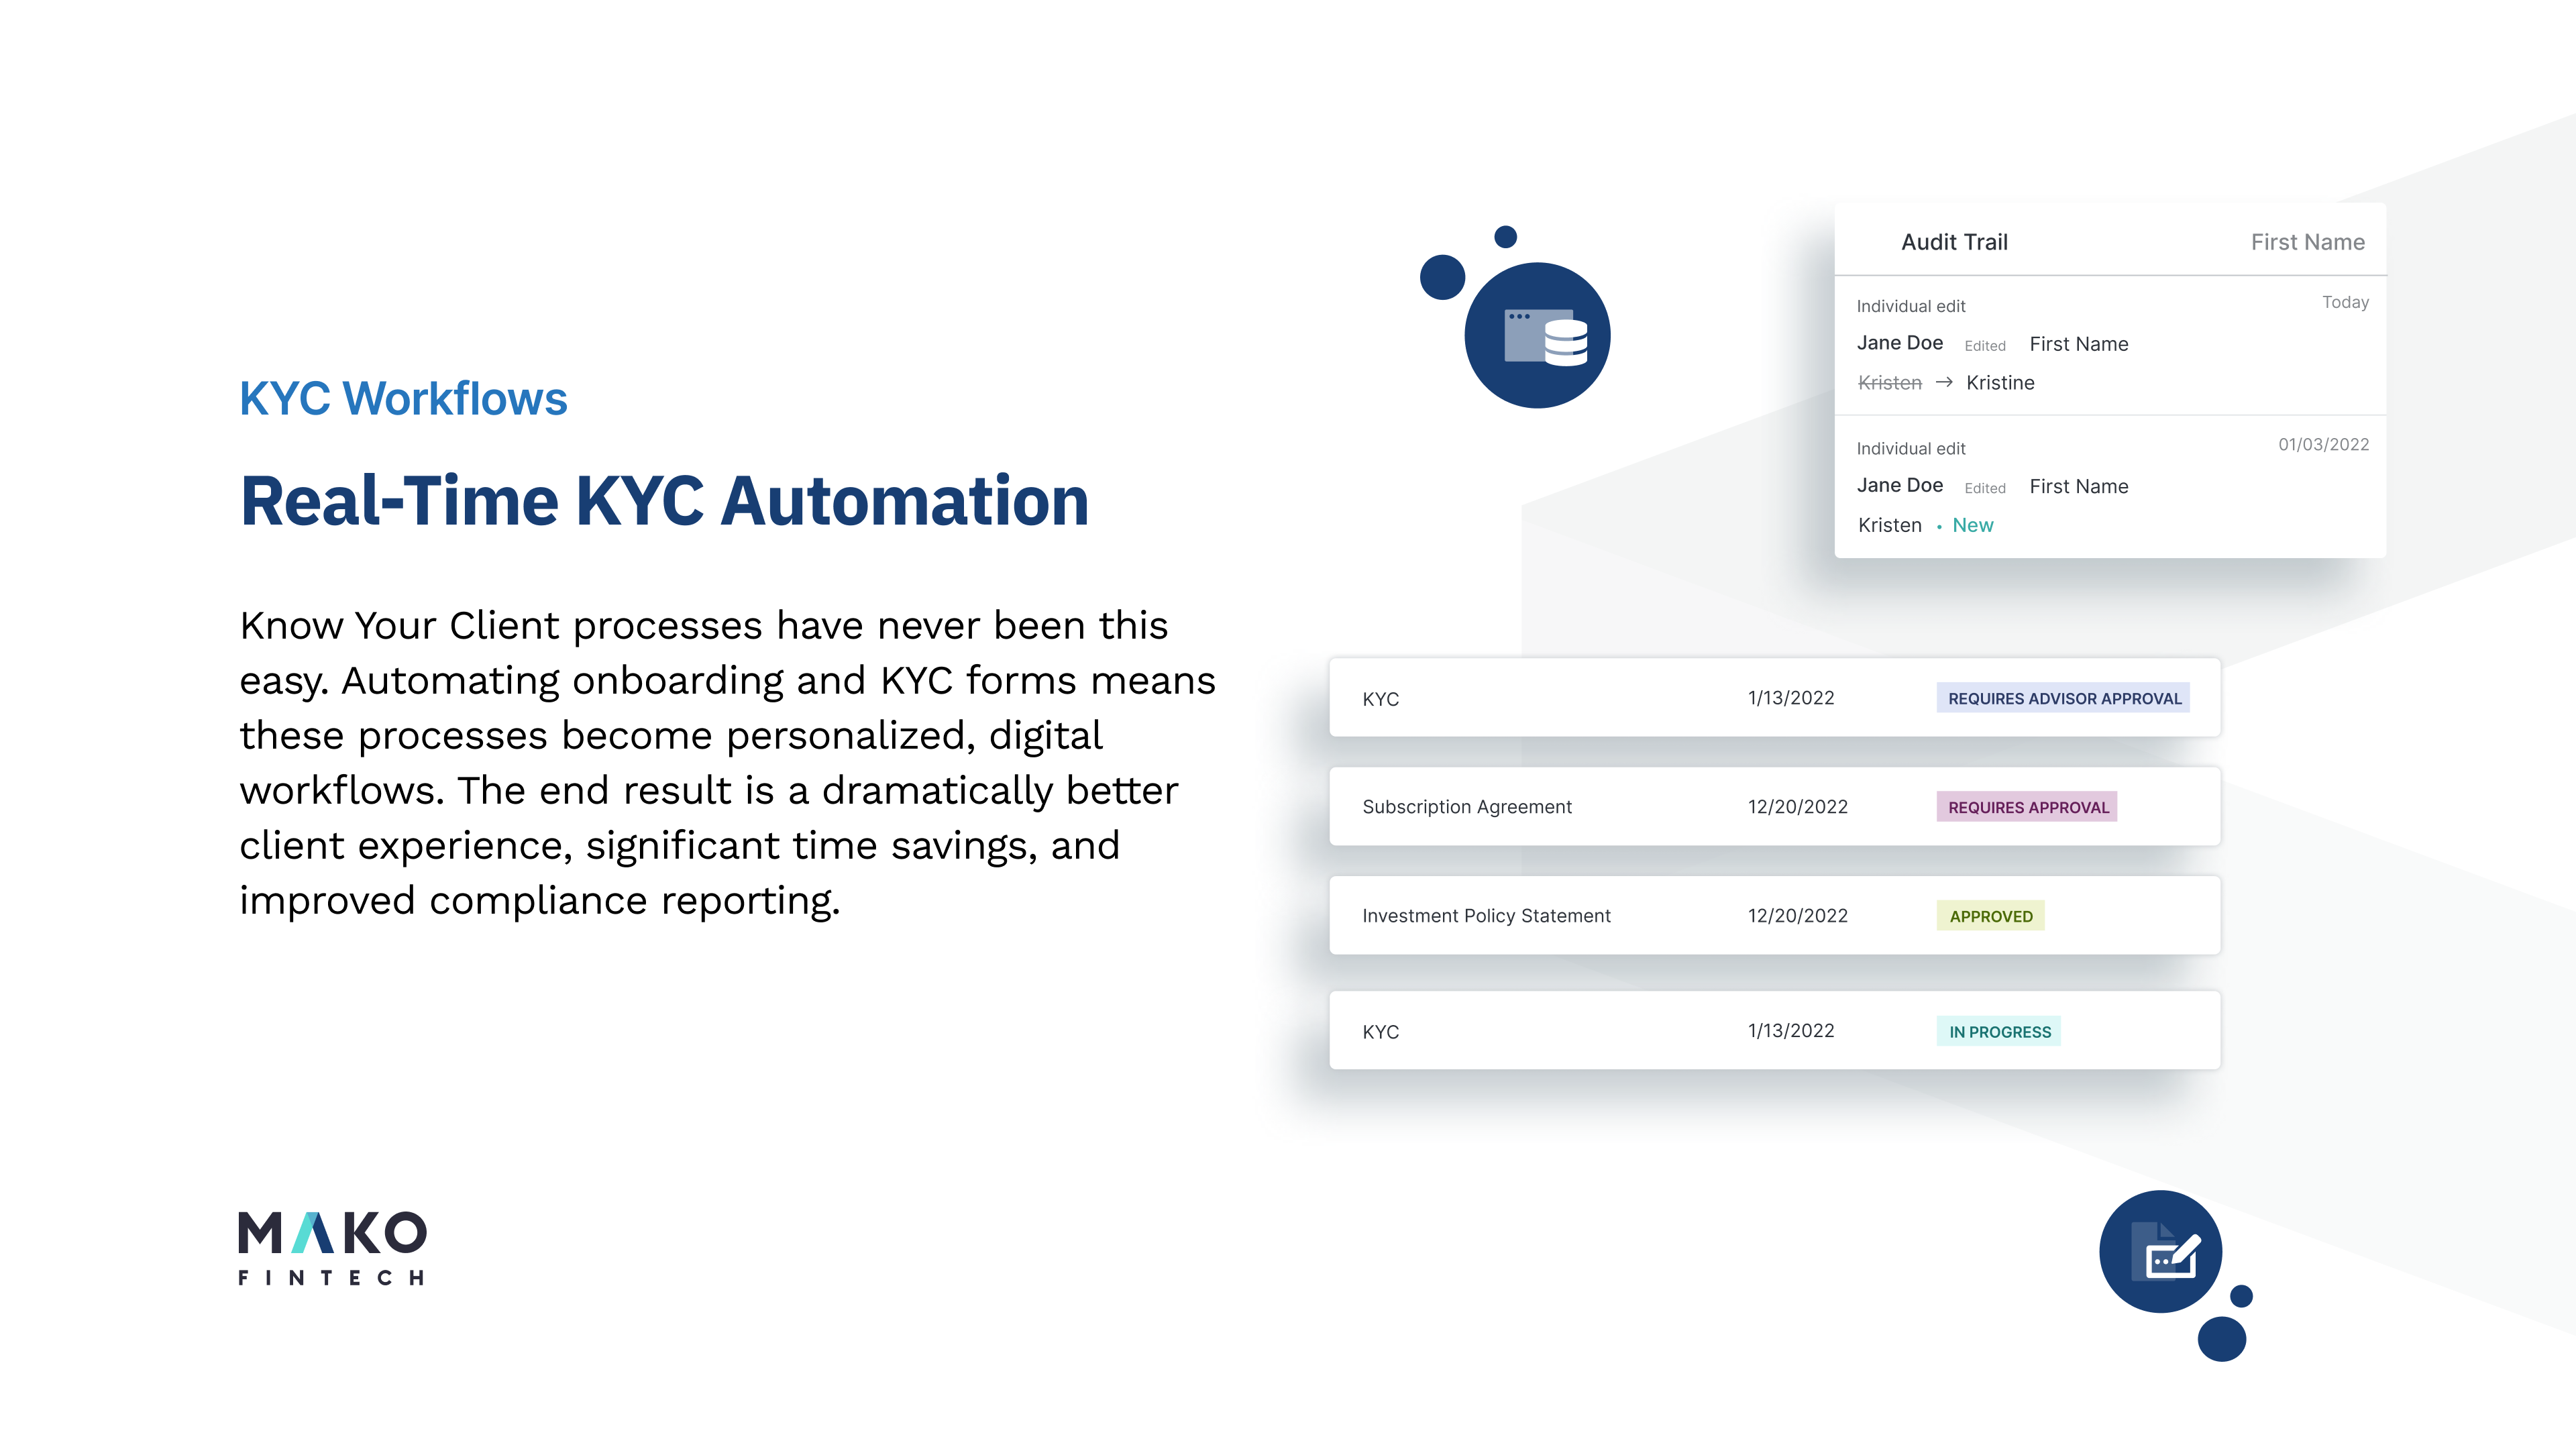 Real-Time KYC Automation: Easy to keep track, better client experience.